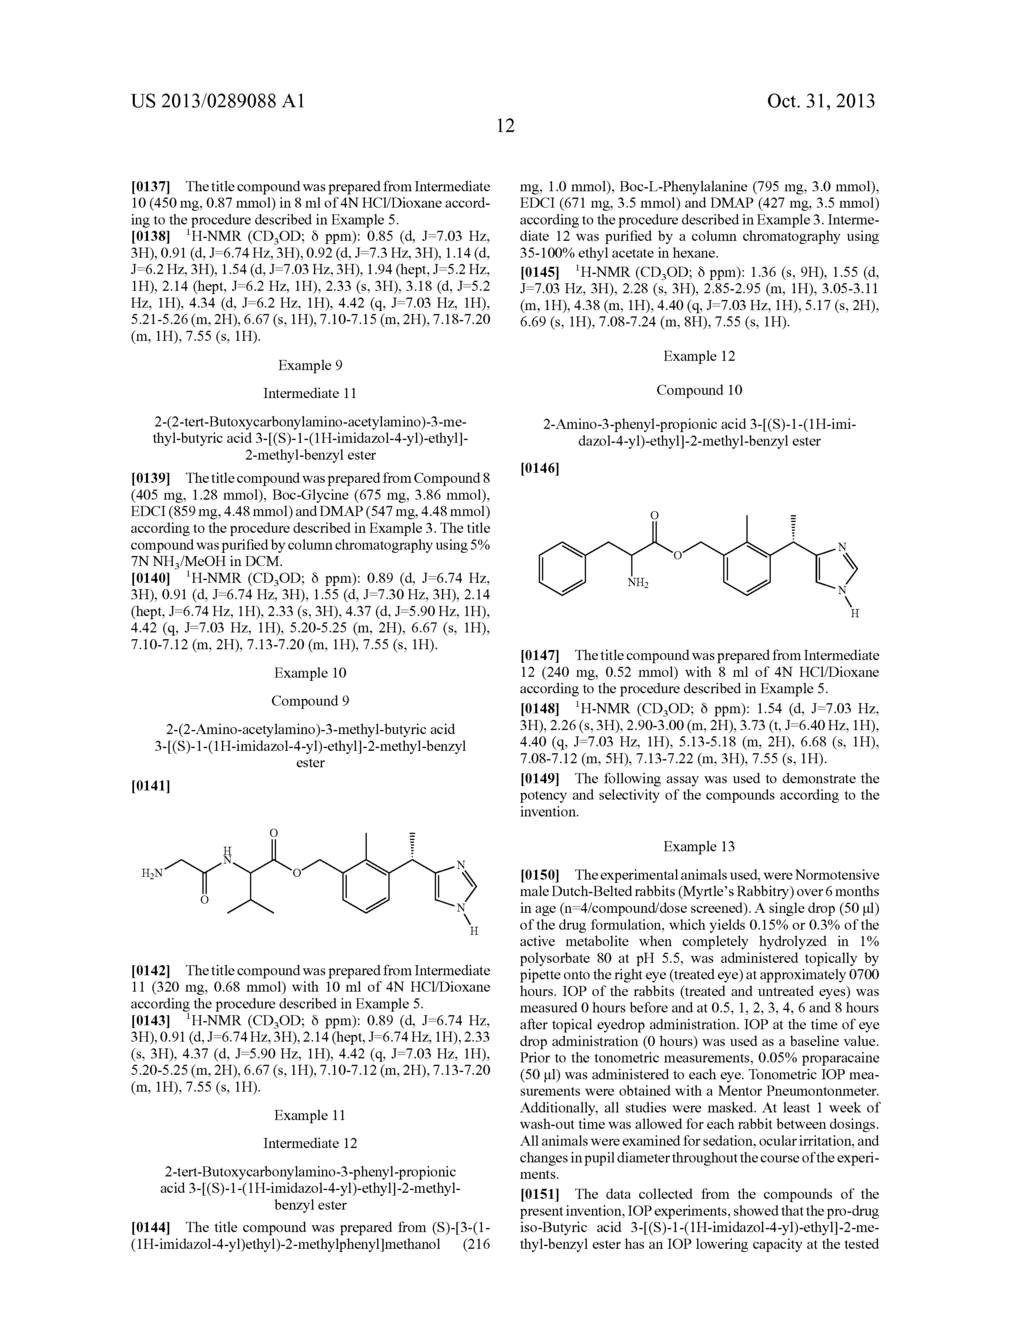 ESTER PRO-DRUGS OF [3-(1-(1H-IMIDAZOL-4-YL)ETHYL)-2-METHYLPHENYL] METHANOL     FOR LOWERING INTRAOCULAR PRESSURE - diagram, schematic, and image 14